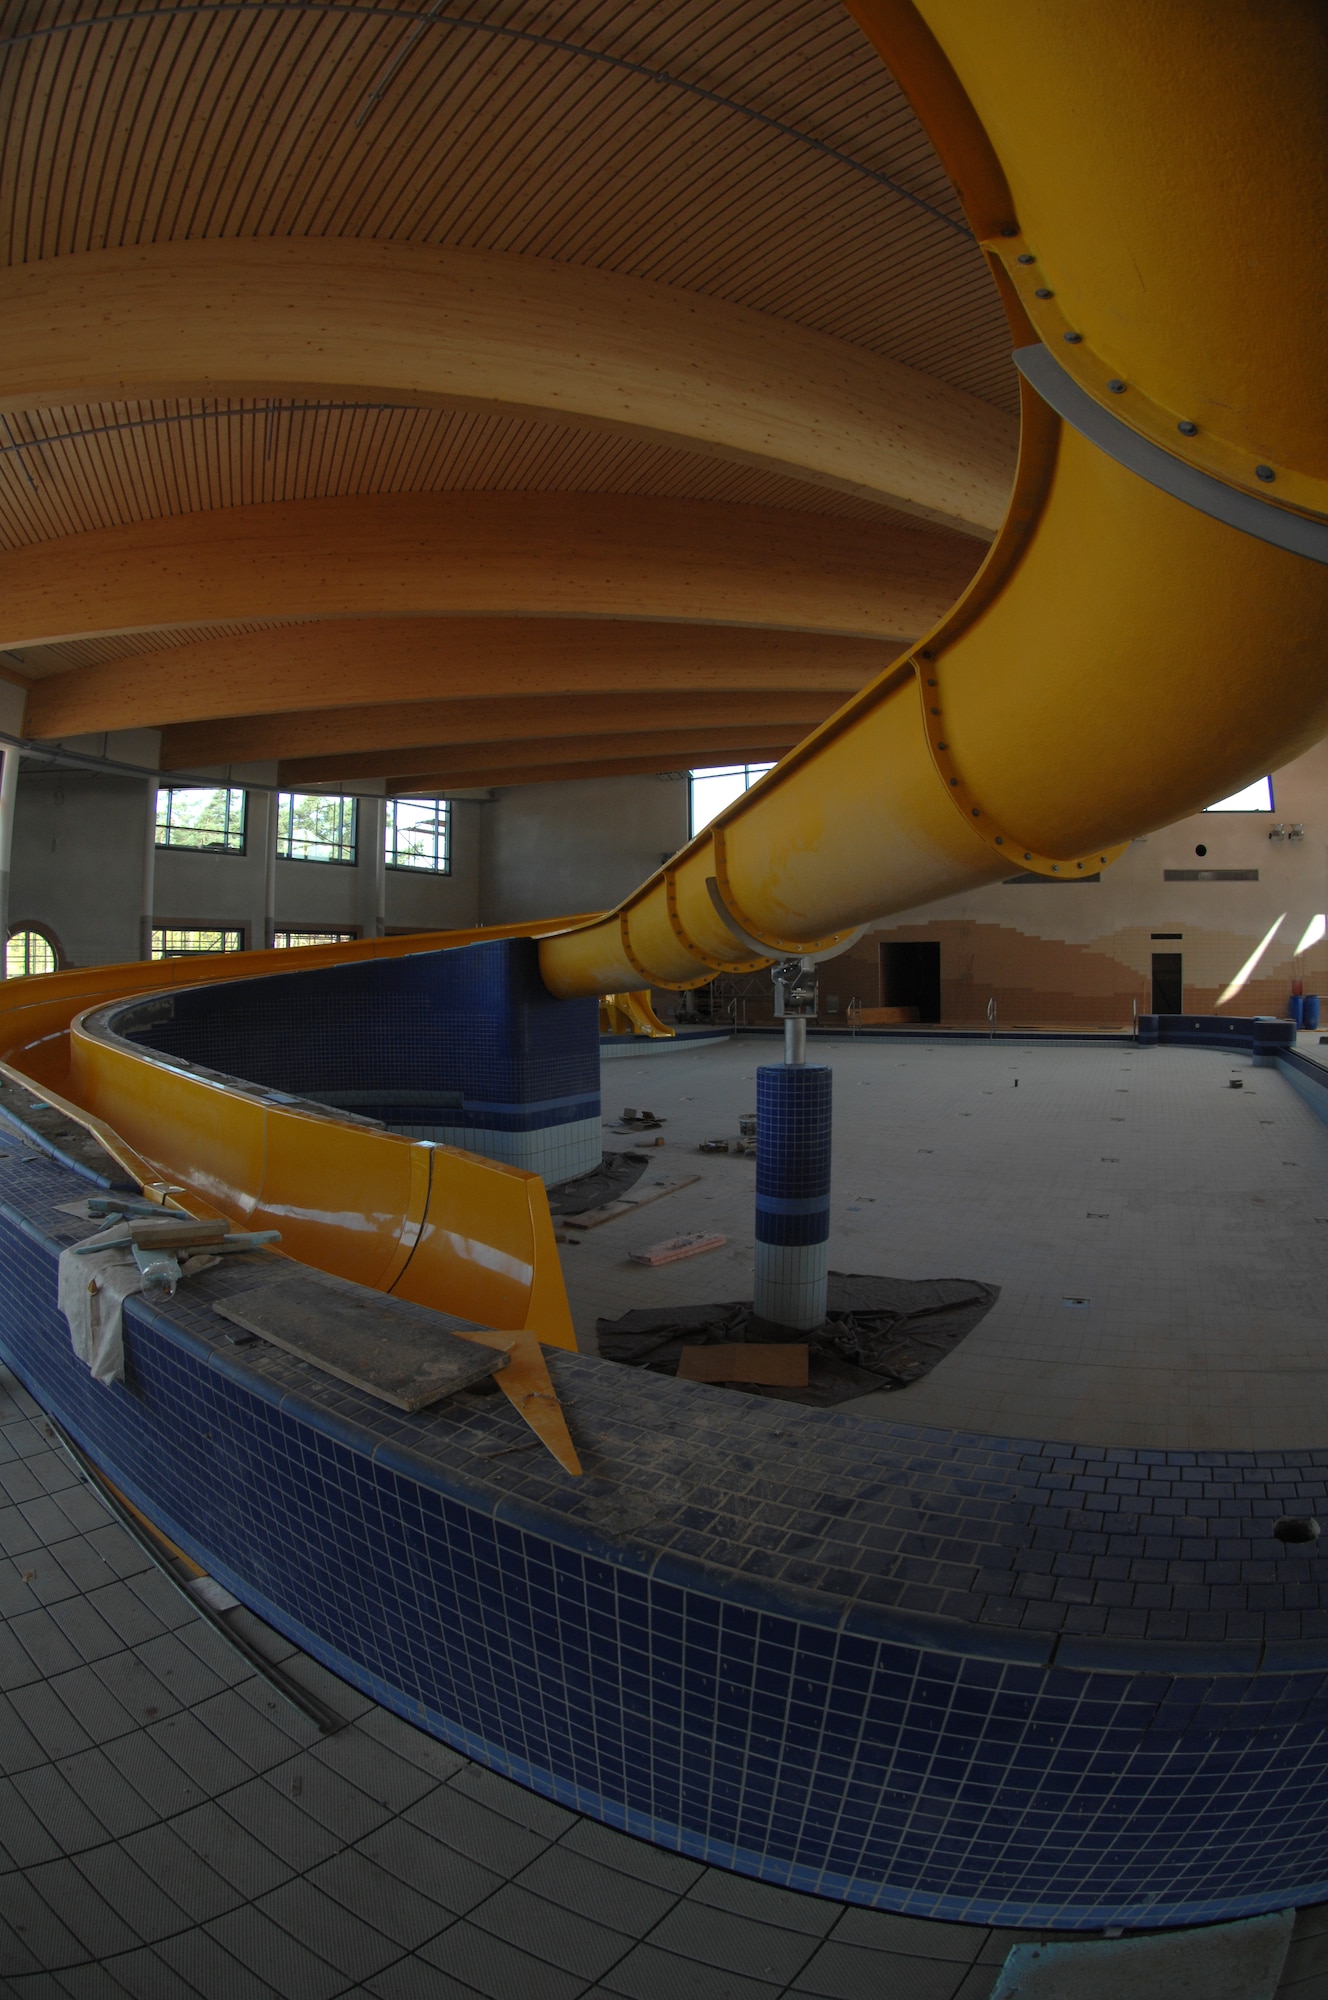 Ramstein's indoor aquatic center nears 90 percent completion, May 1. The indoor aquatic center's opening ceremony is scheduled for July 1.  Photo by Airman 1st Class Amber Bressler